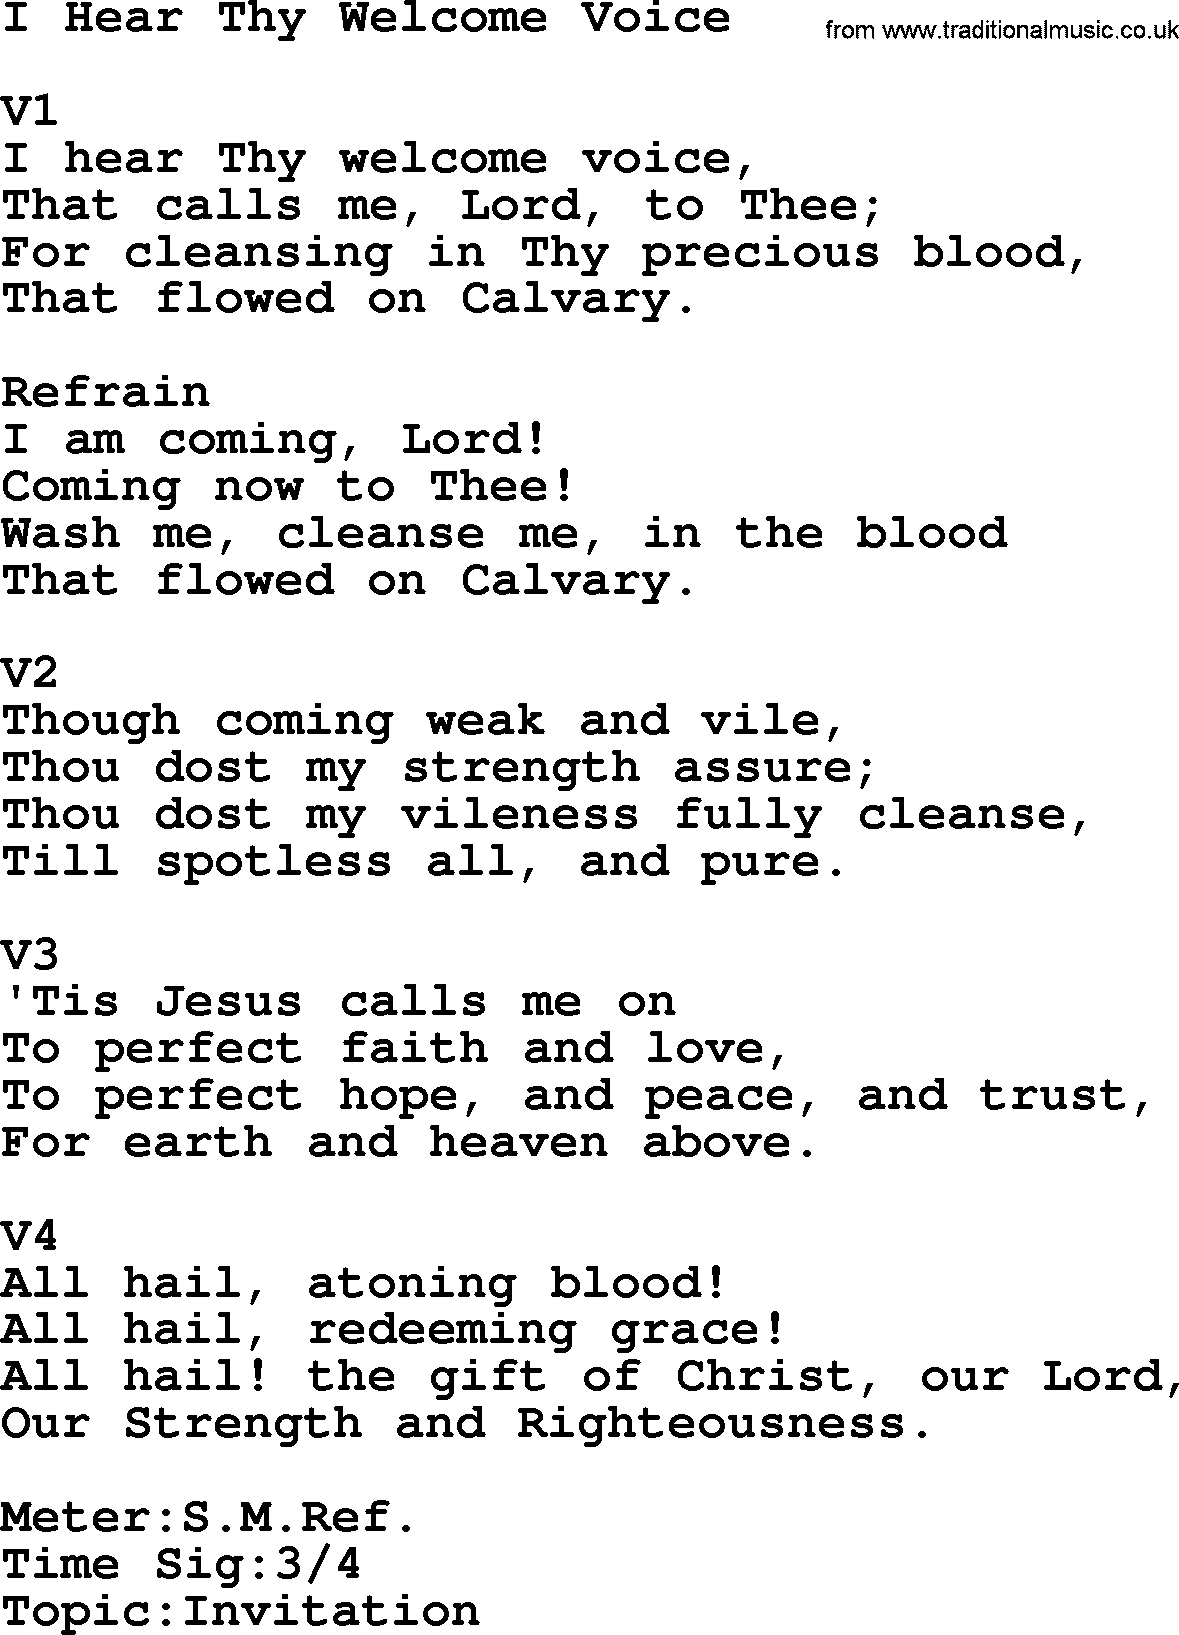 Adventist Hynms collection, Hymn: I Hear Thy Welcome Voice, lyrics with PDF